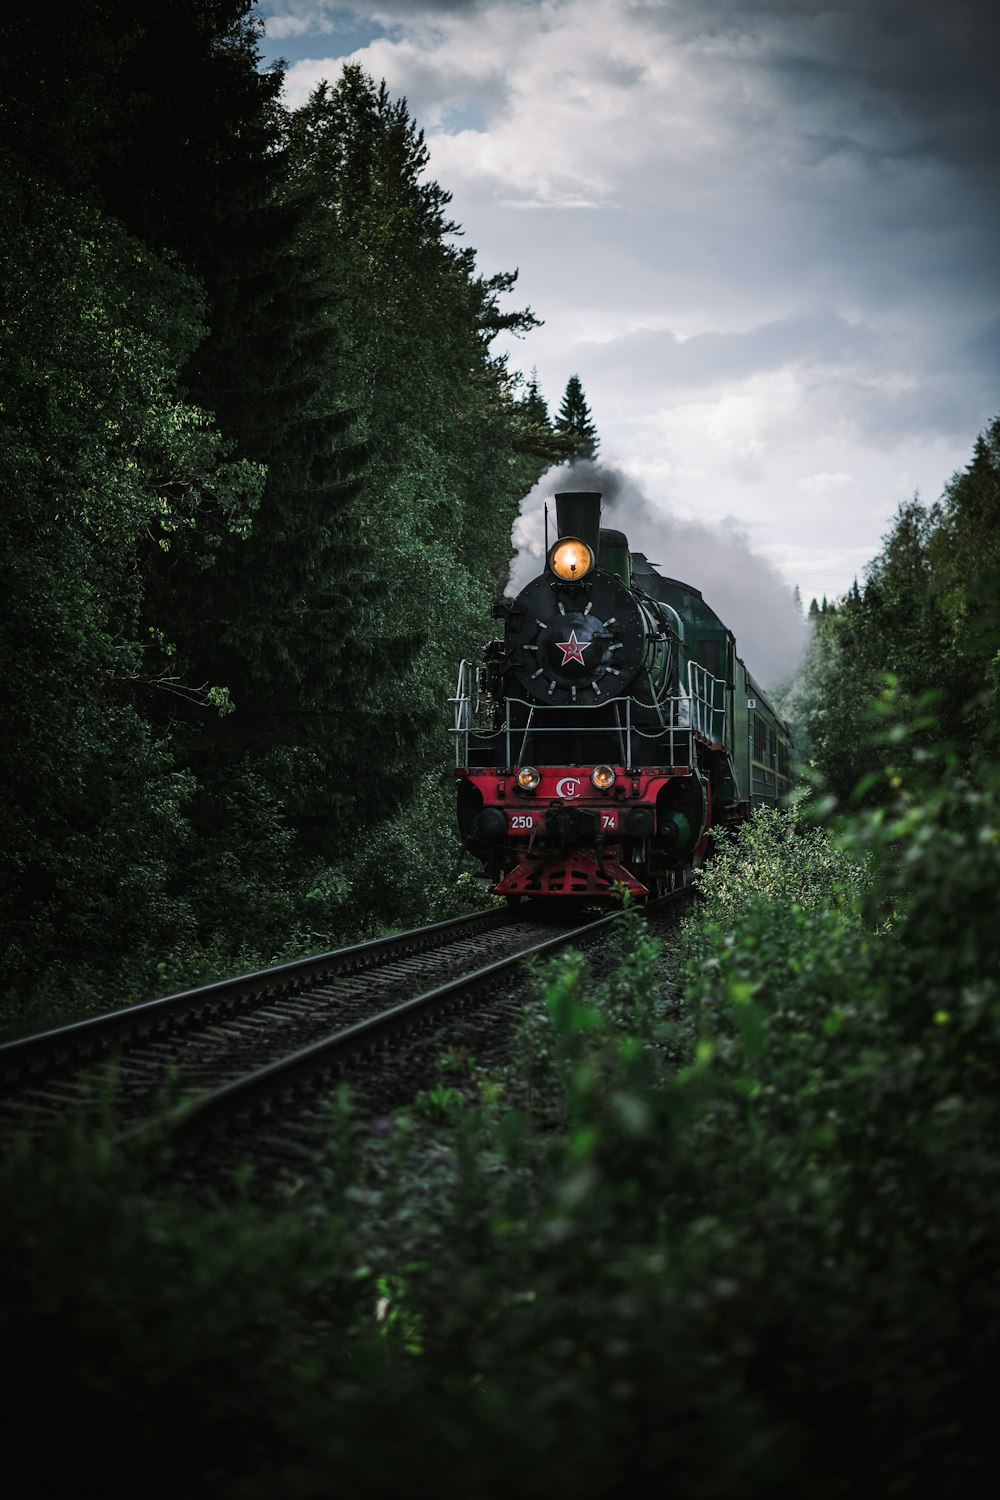 red and black train on rail tracks surrounded by green trees during daytime